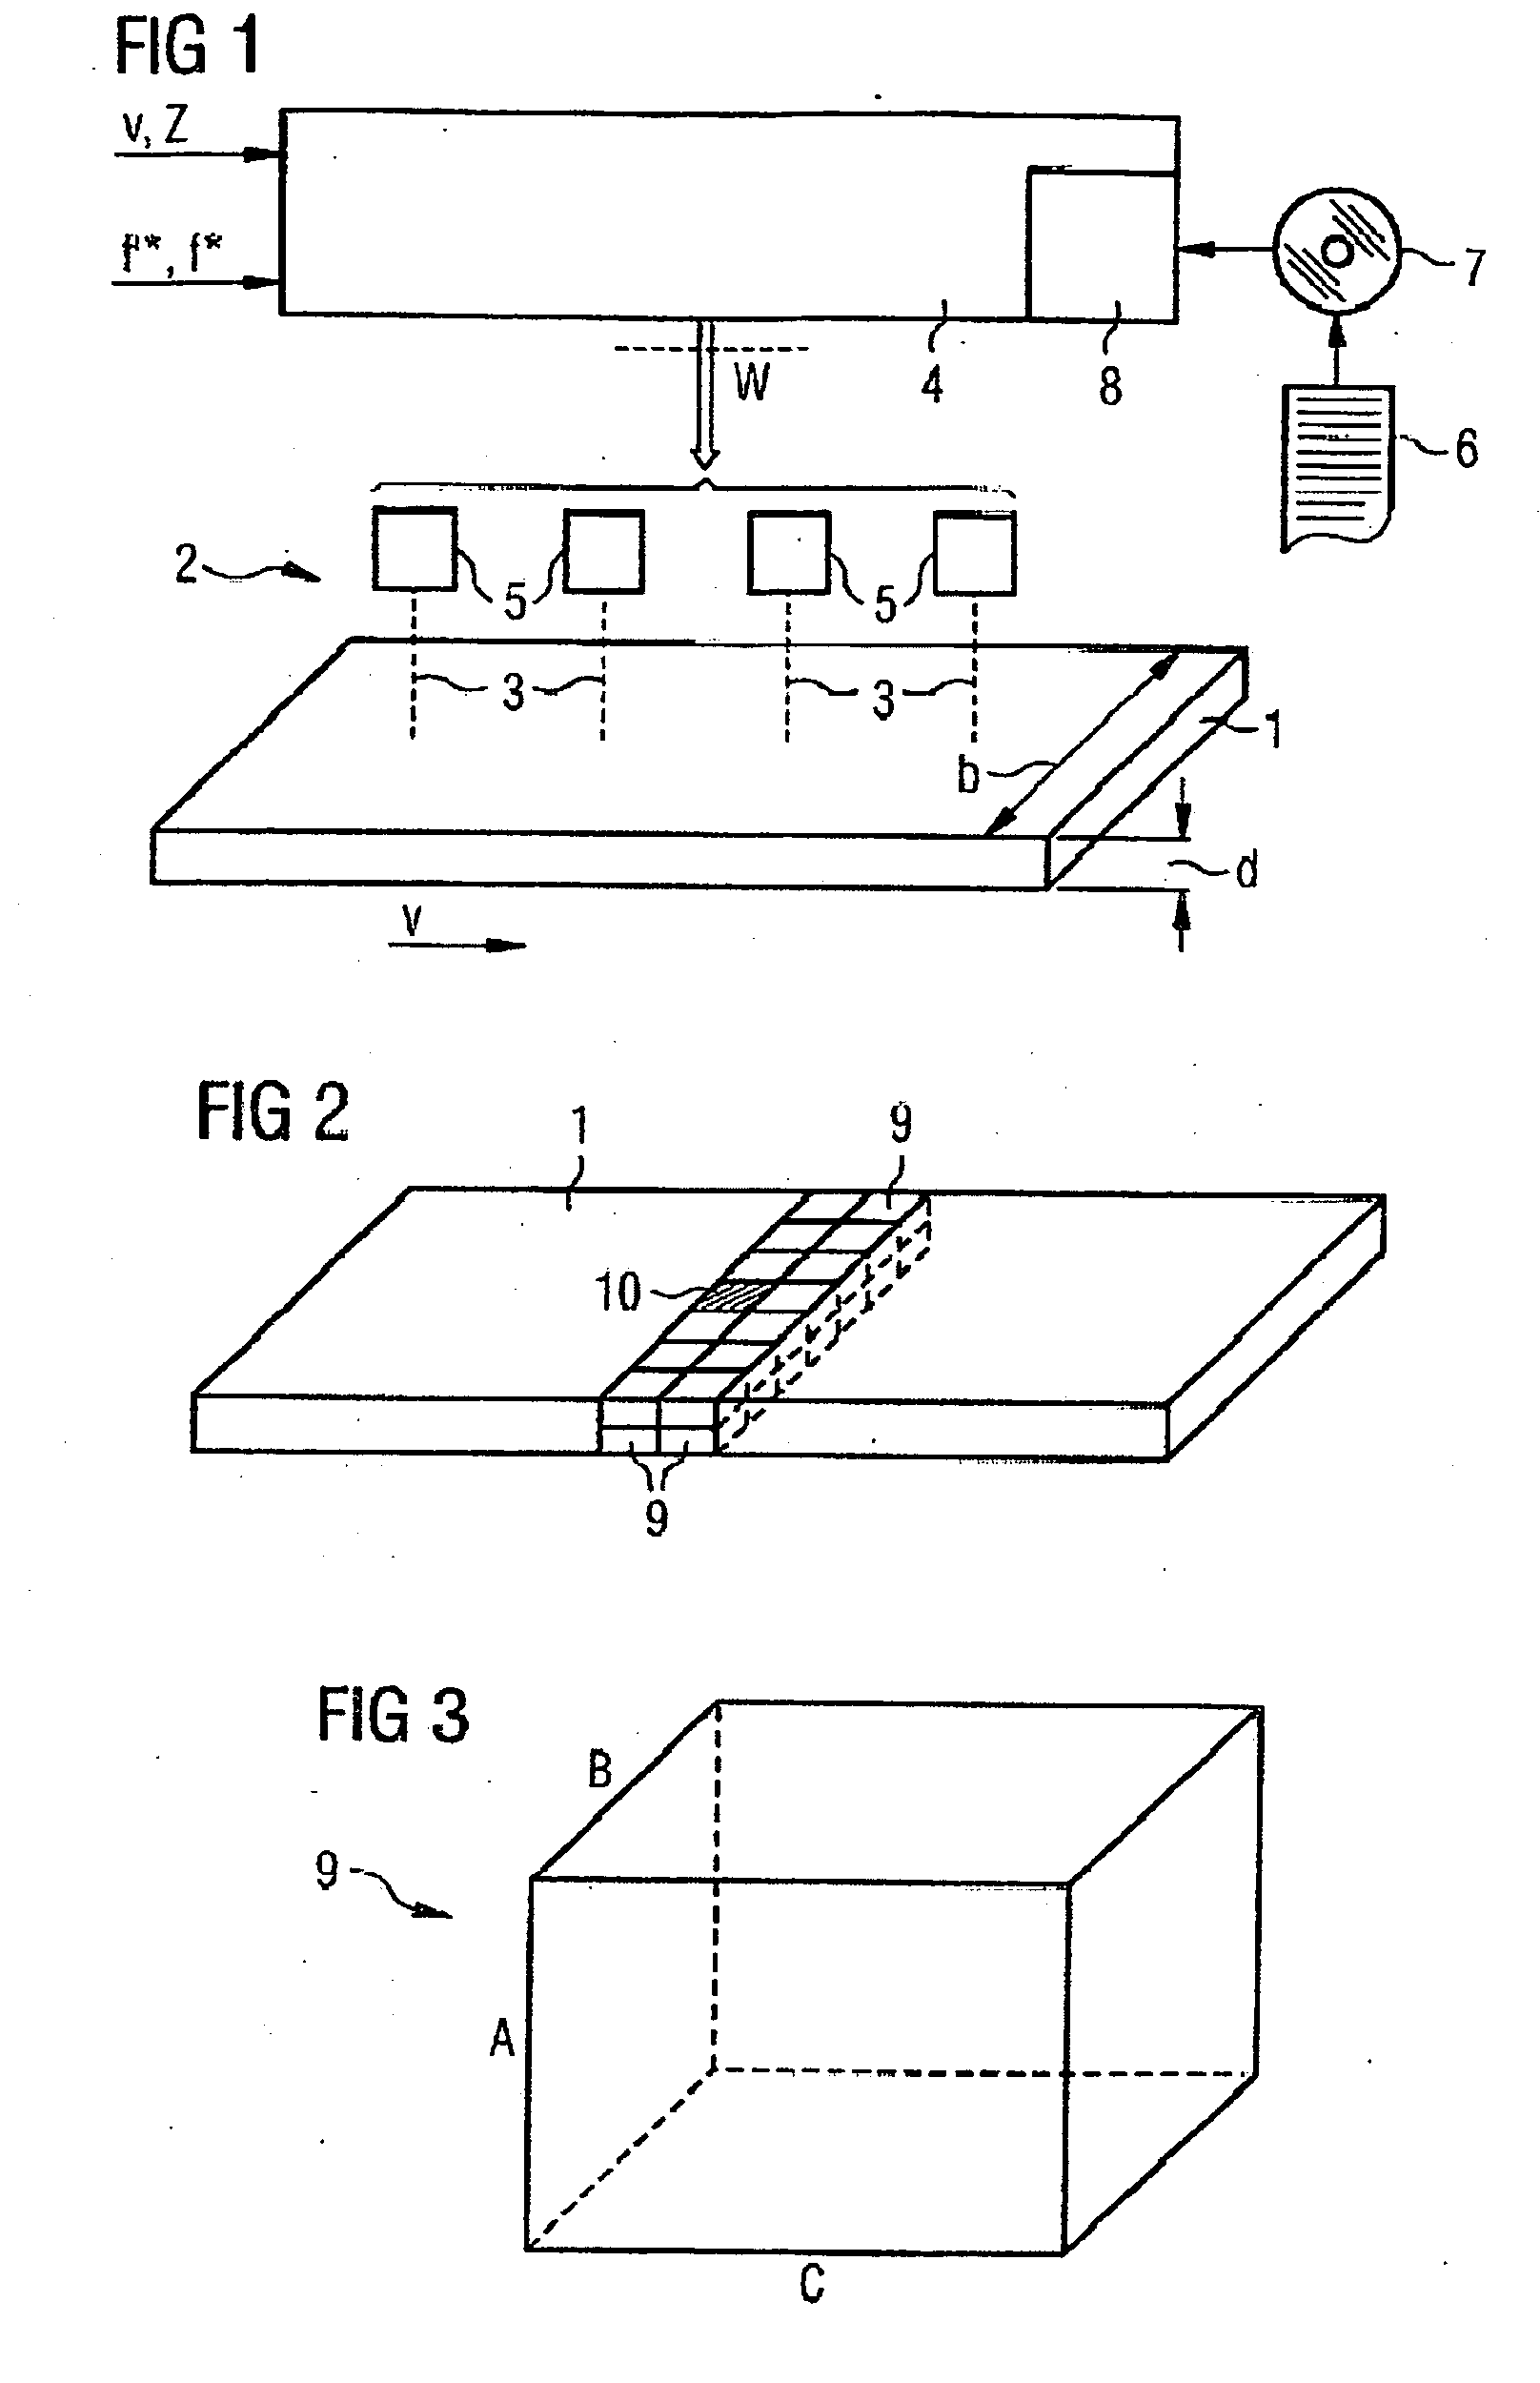 Computer-Assisted Modelling Method for the Behavior of a Steel Volume Having a Volumetric Surface